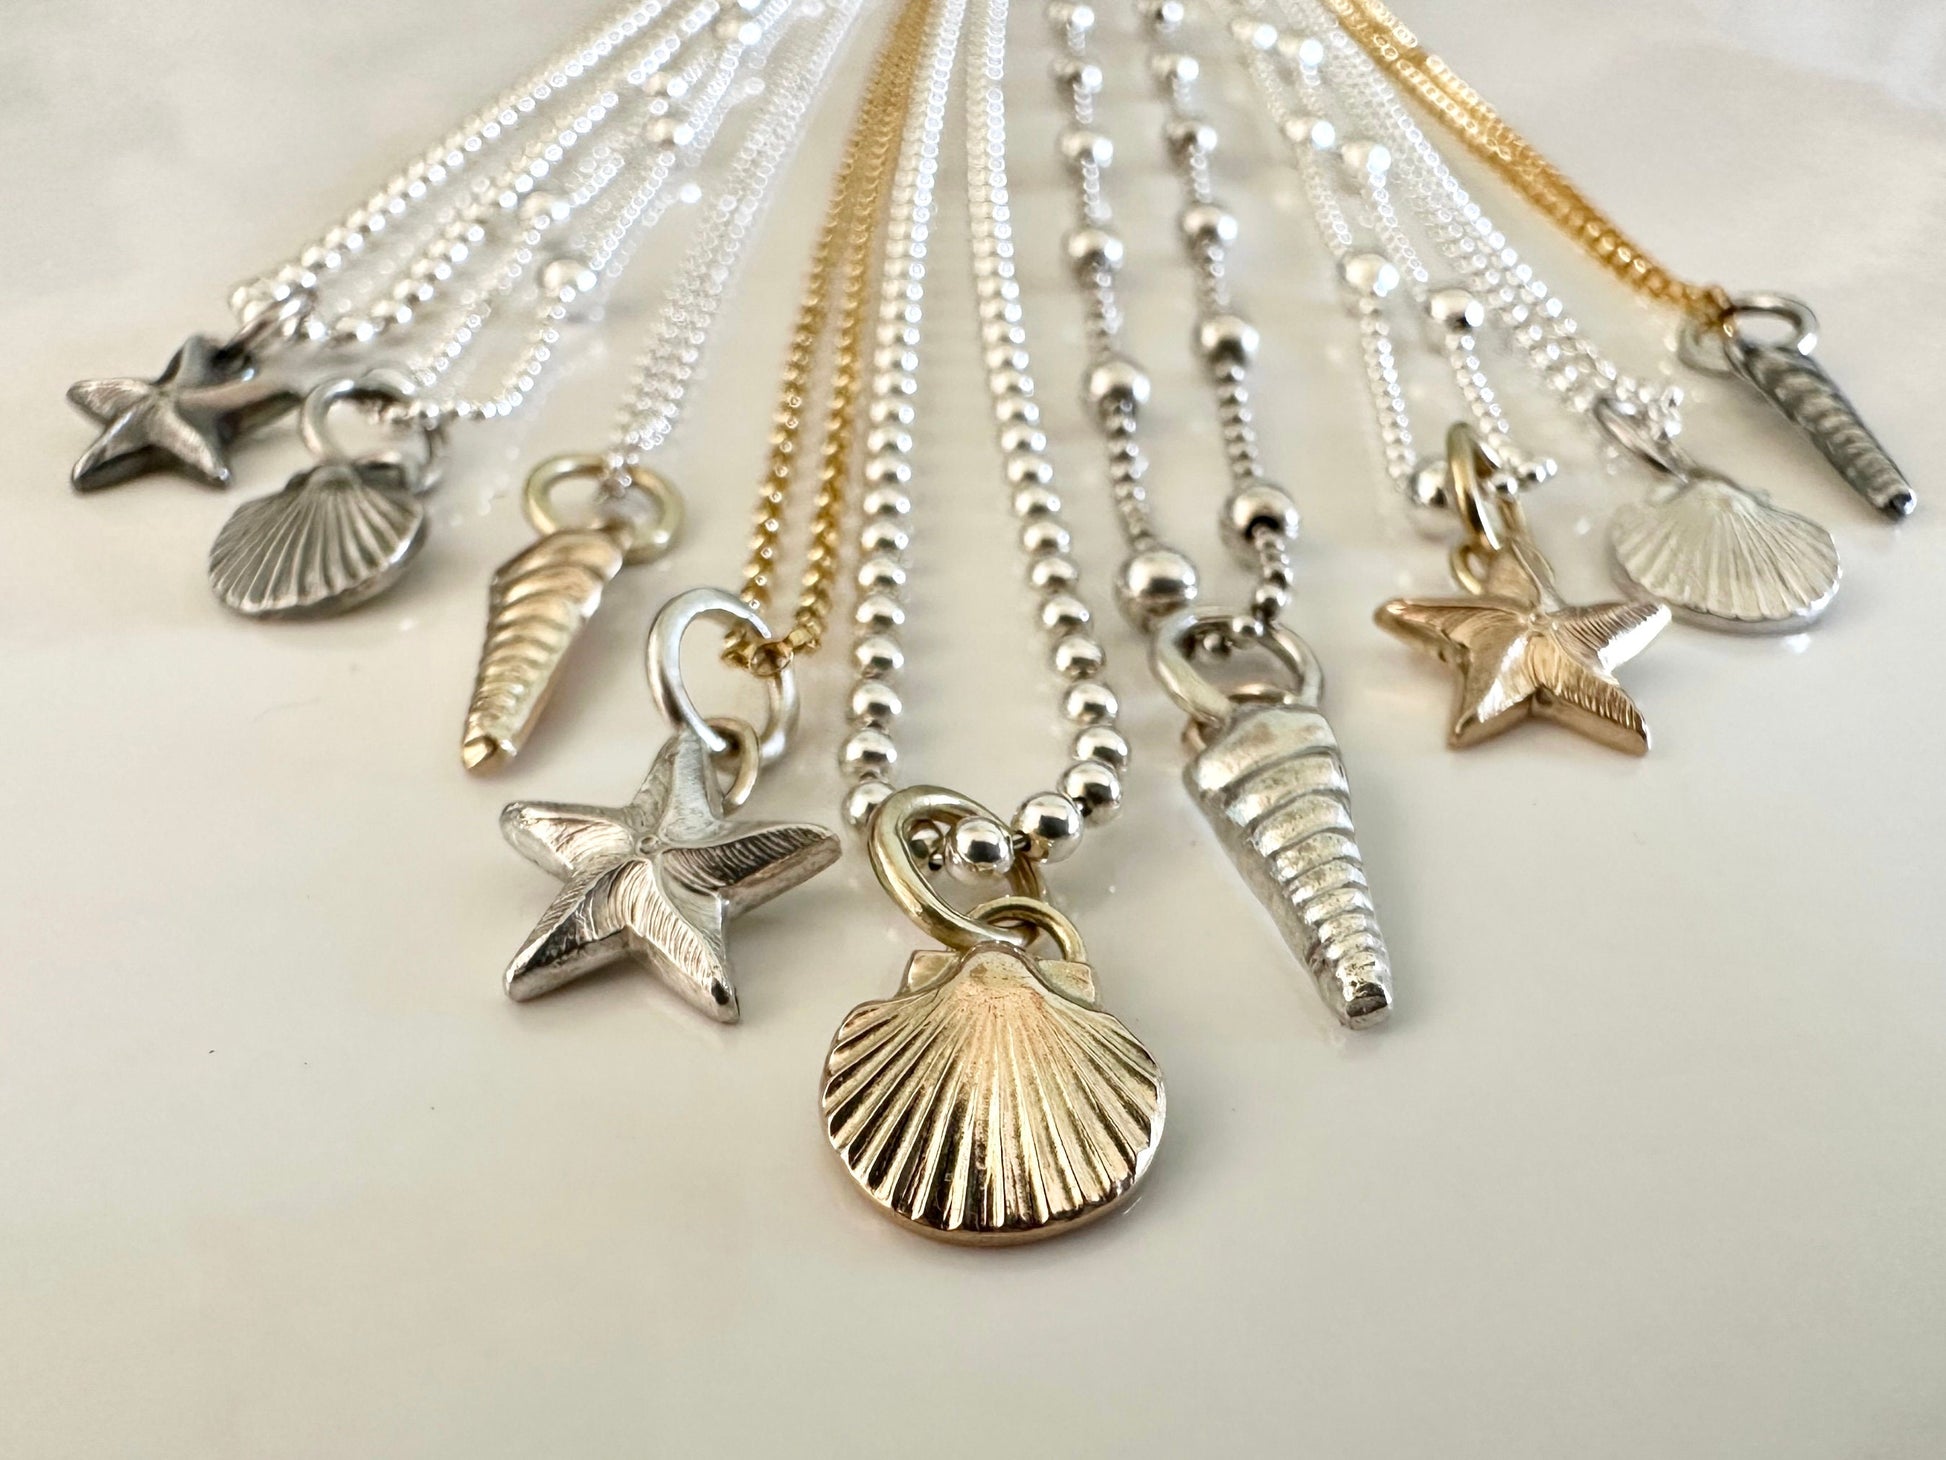 Hallmarked solid 9ct gold Turritella Seashell pendant charm necklace, handmade from recycled 9ct gold, Ready to ship